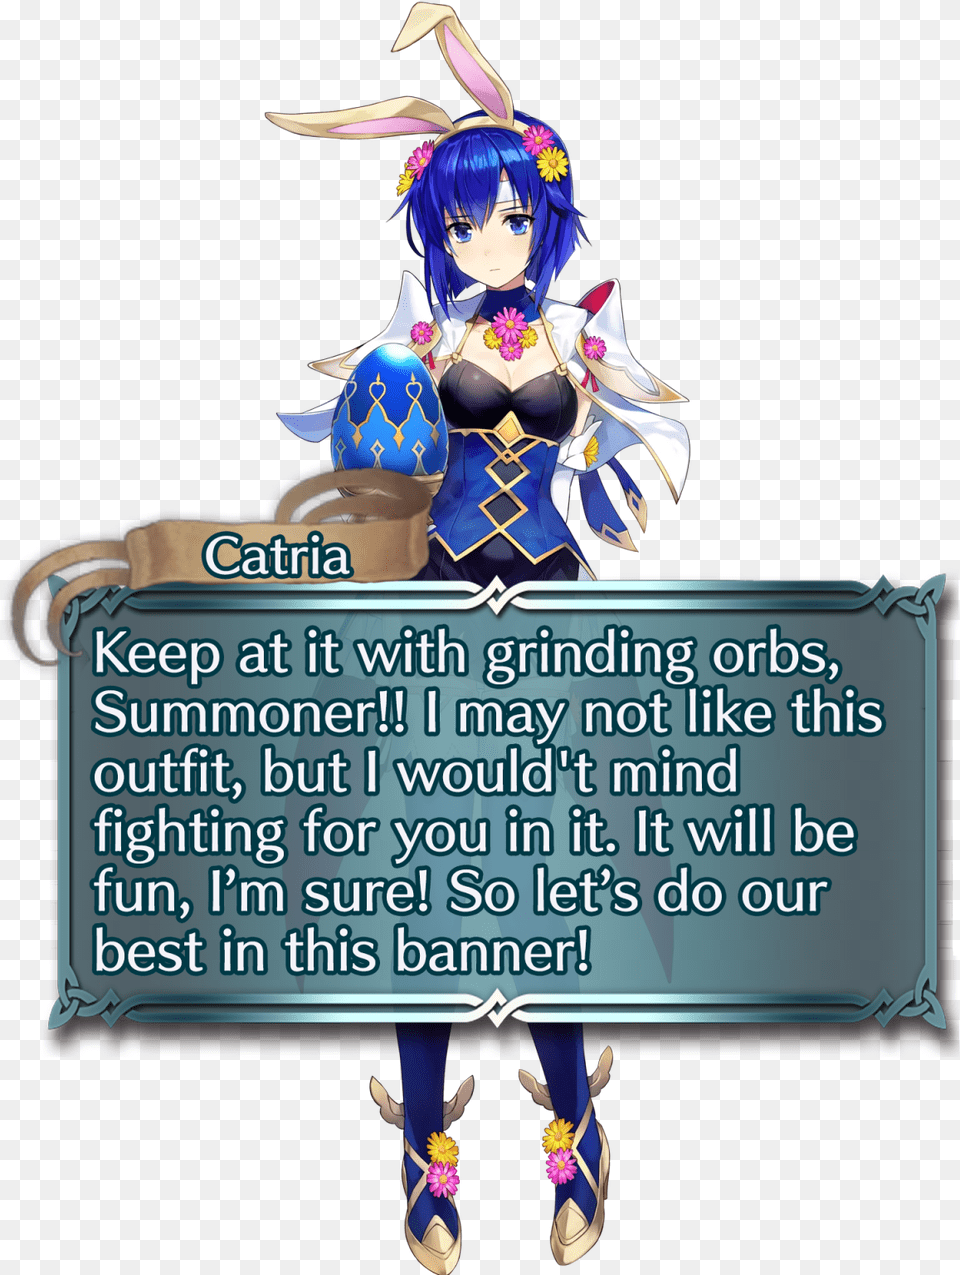 Can I Get Anybunny Wishing Me Good Luck On The Spring Spring Catria Fire Emblem, Book, Publication, Comics, Adult Free Png Download